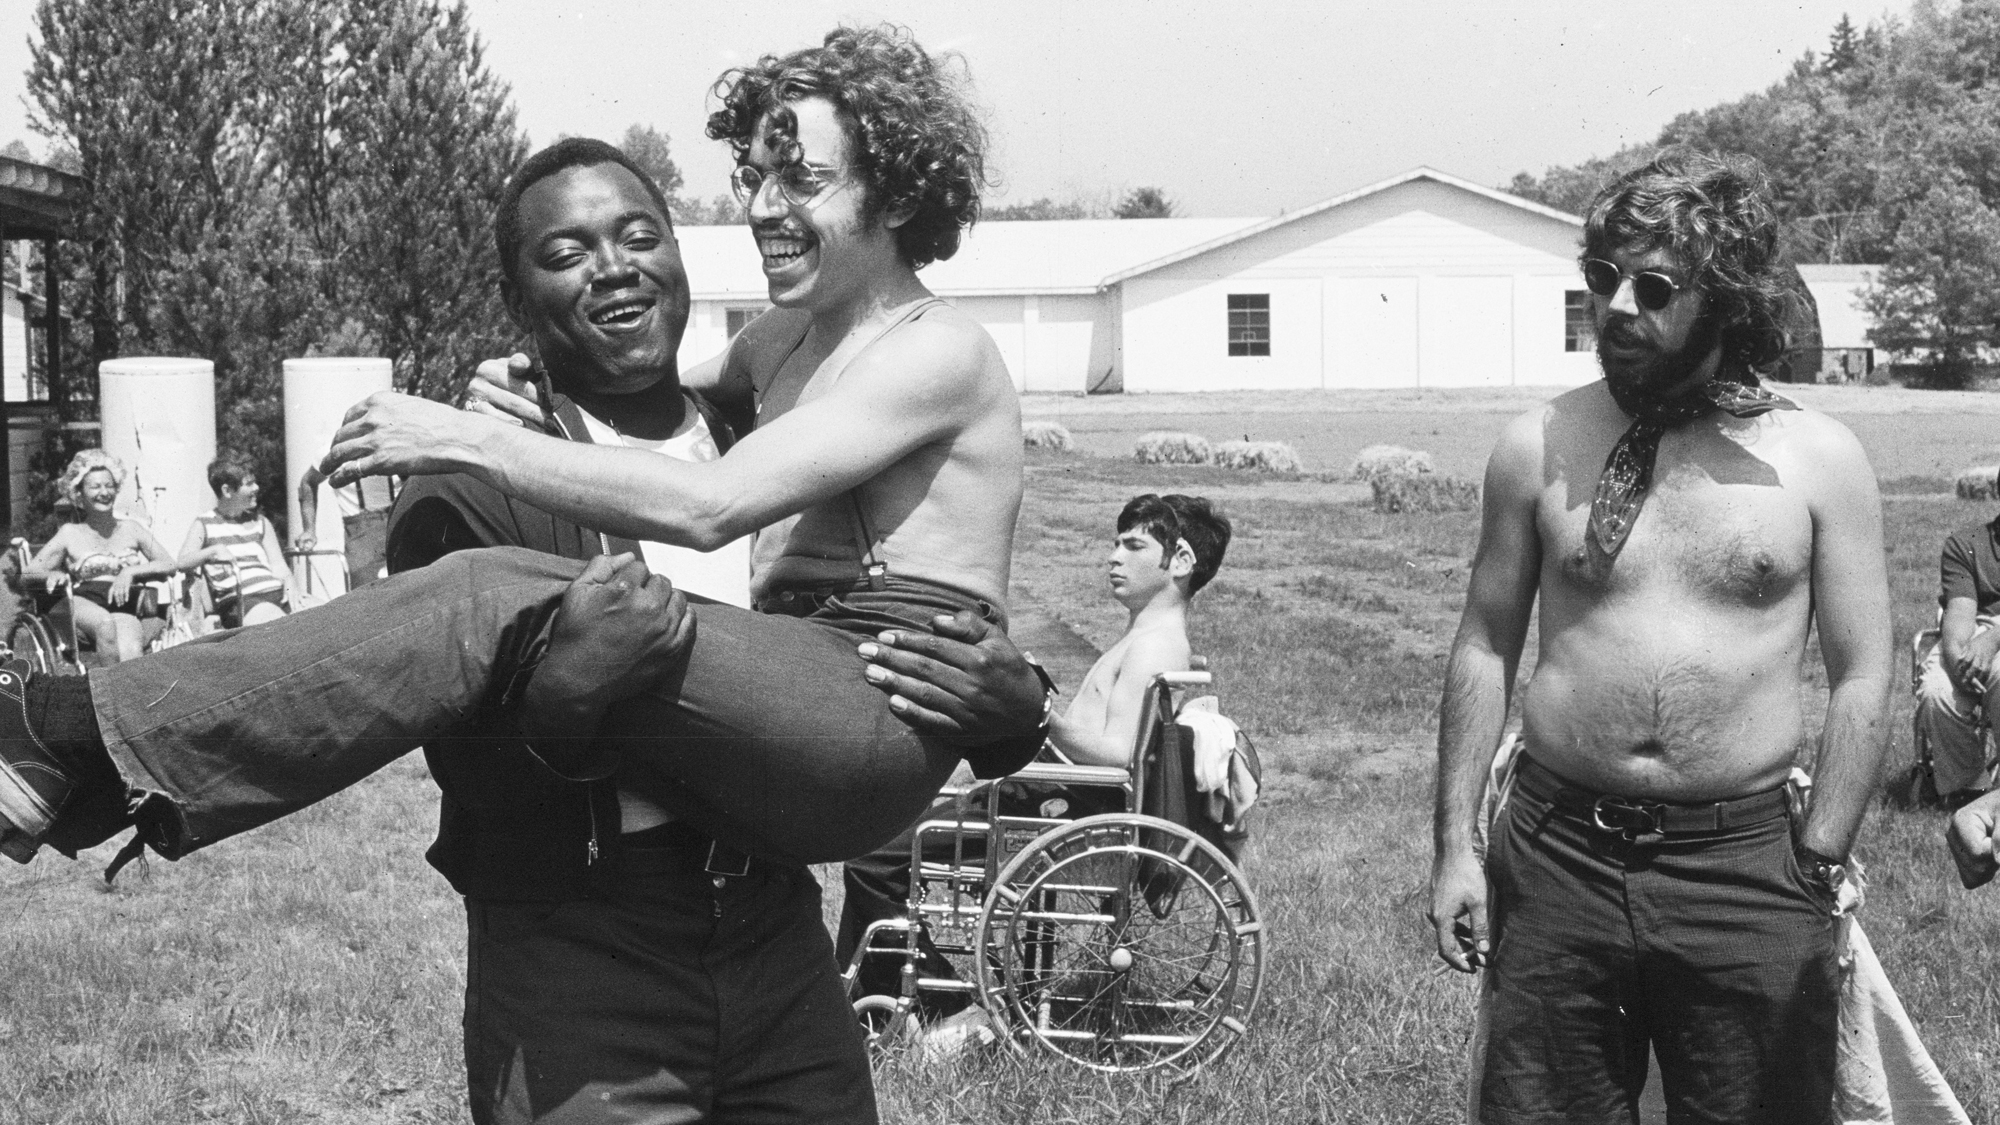 A photo from the documentary "Crip Camp" showing attendees, one carrying another in their arms.